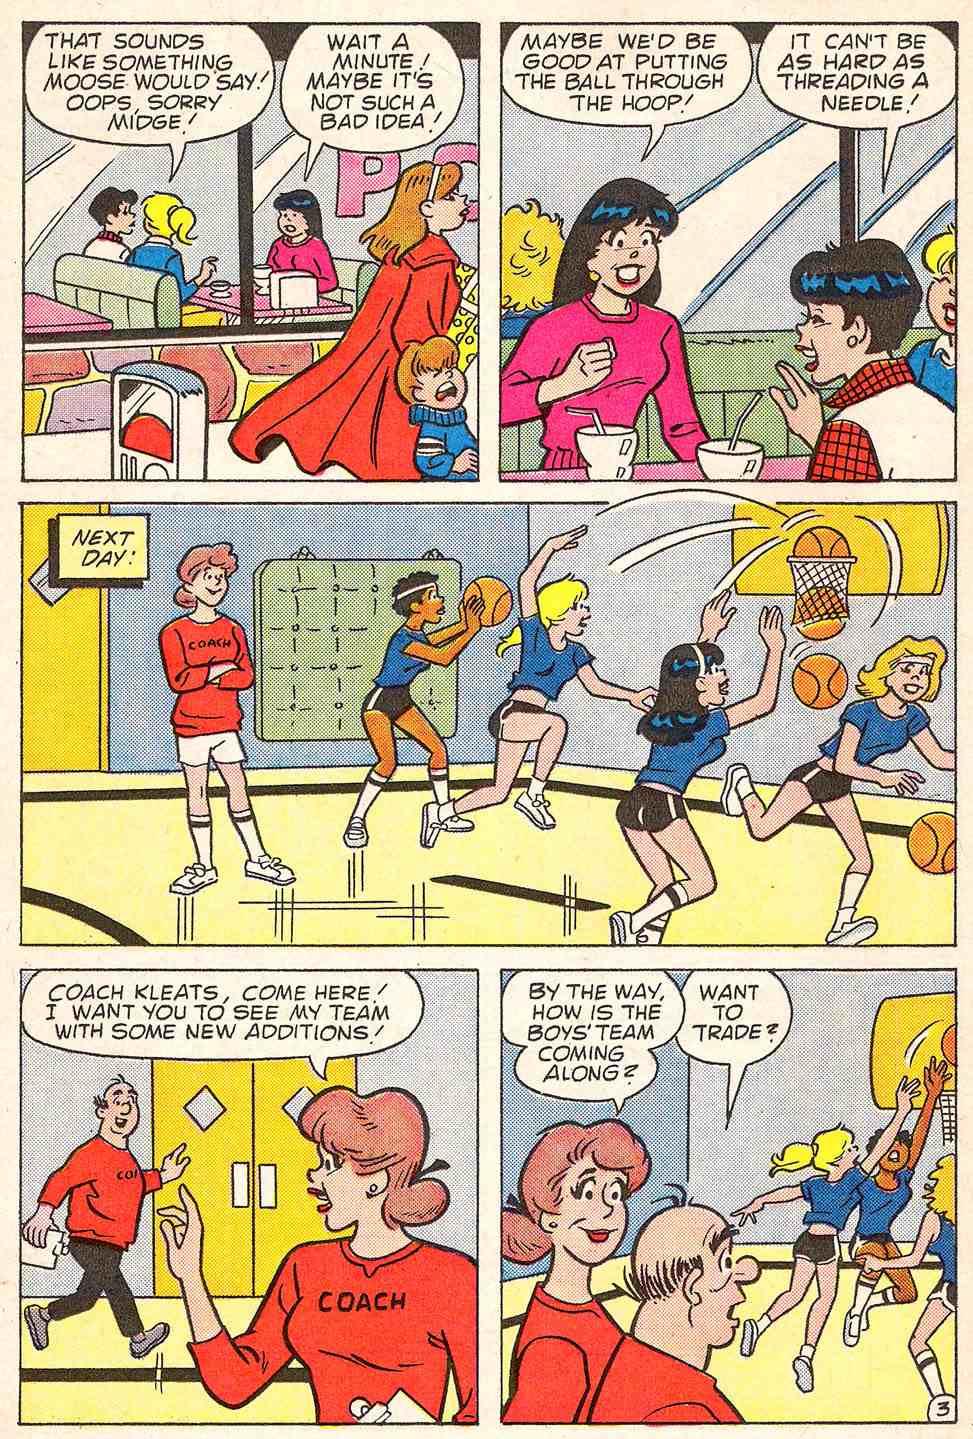 Read online Archie's Girls Betty and Veronica comic -  Issue #347 - 22